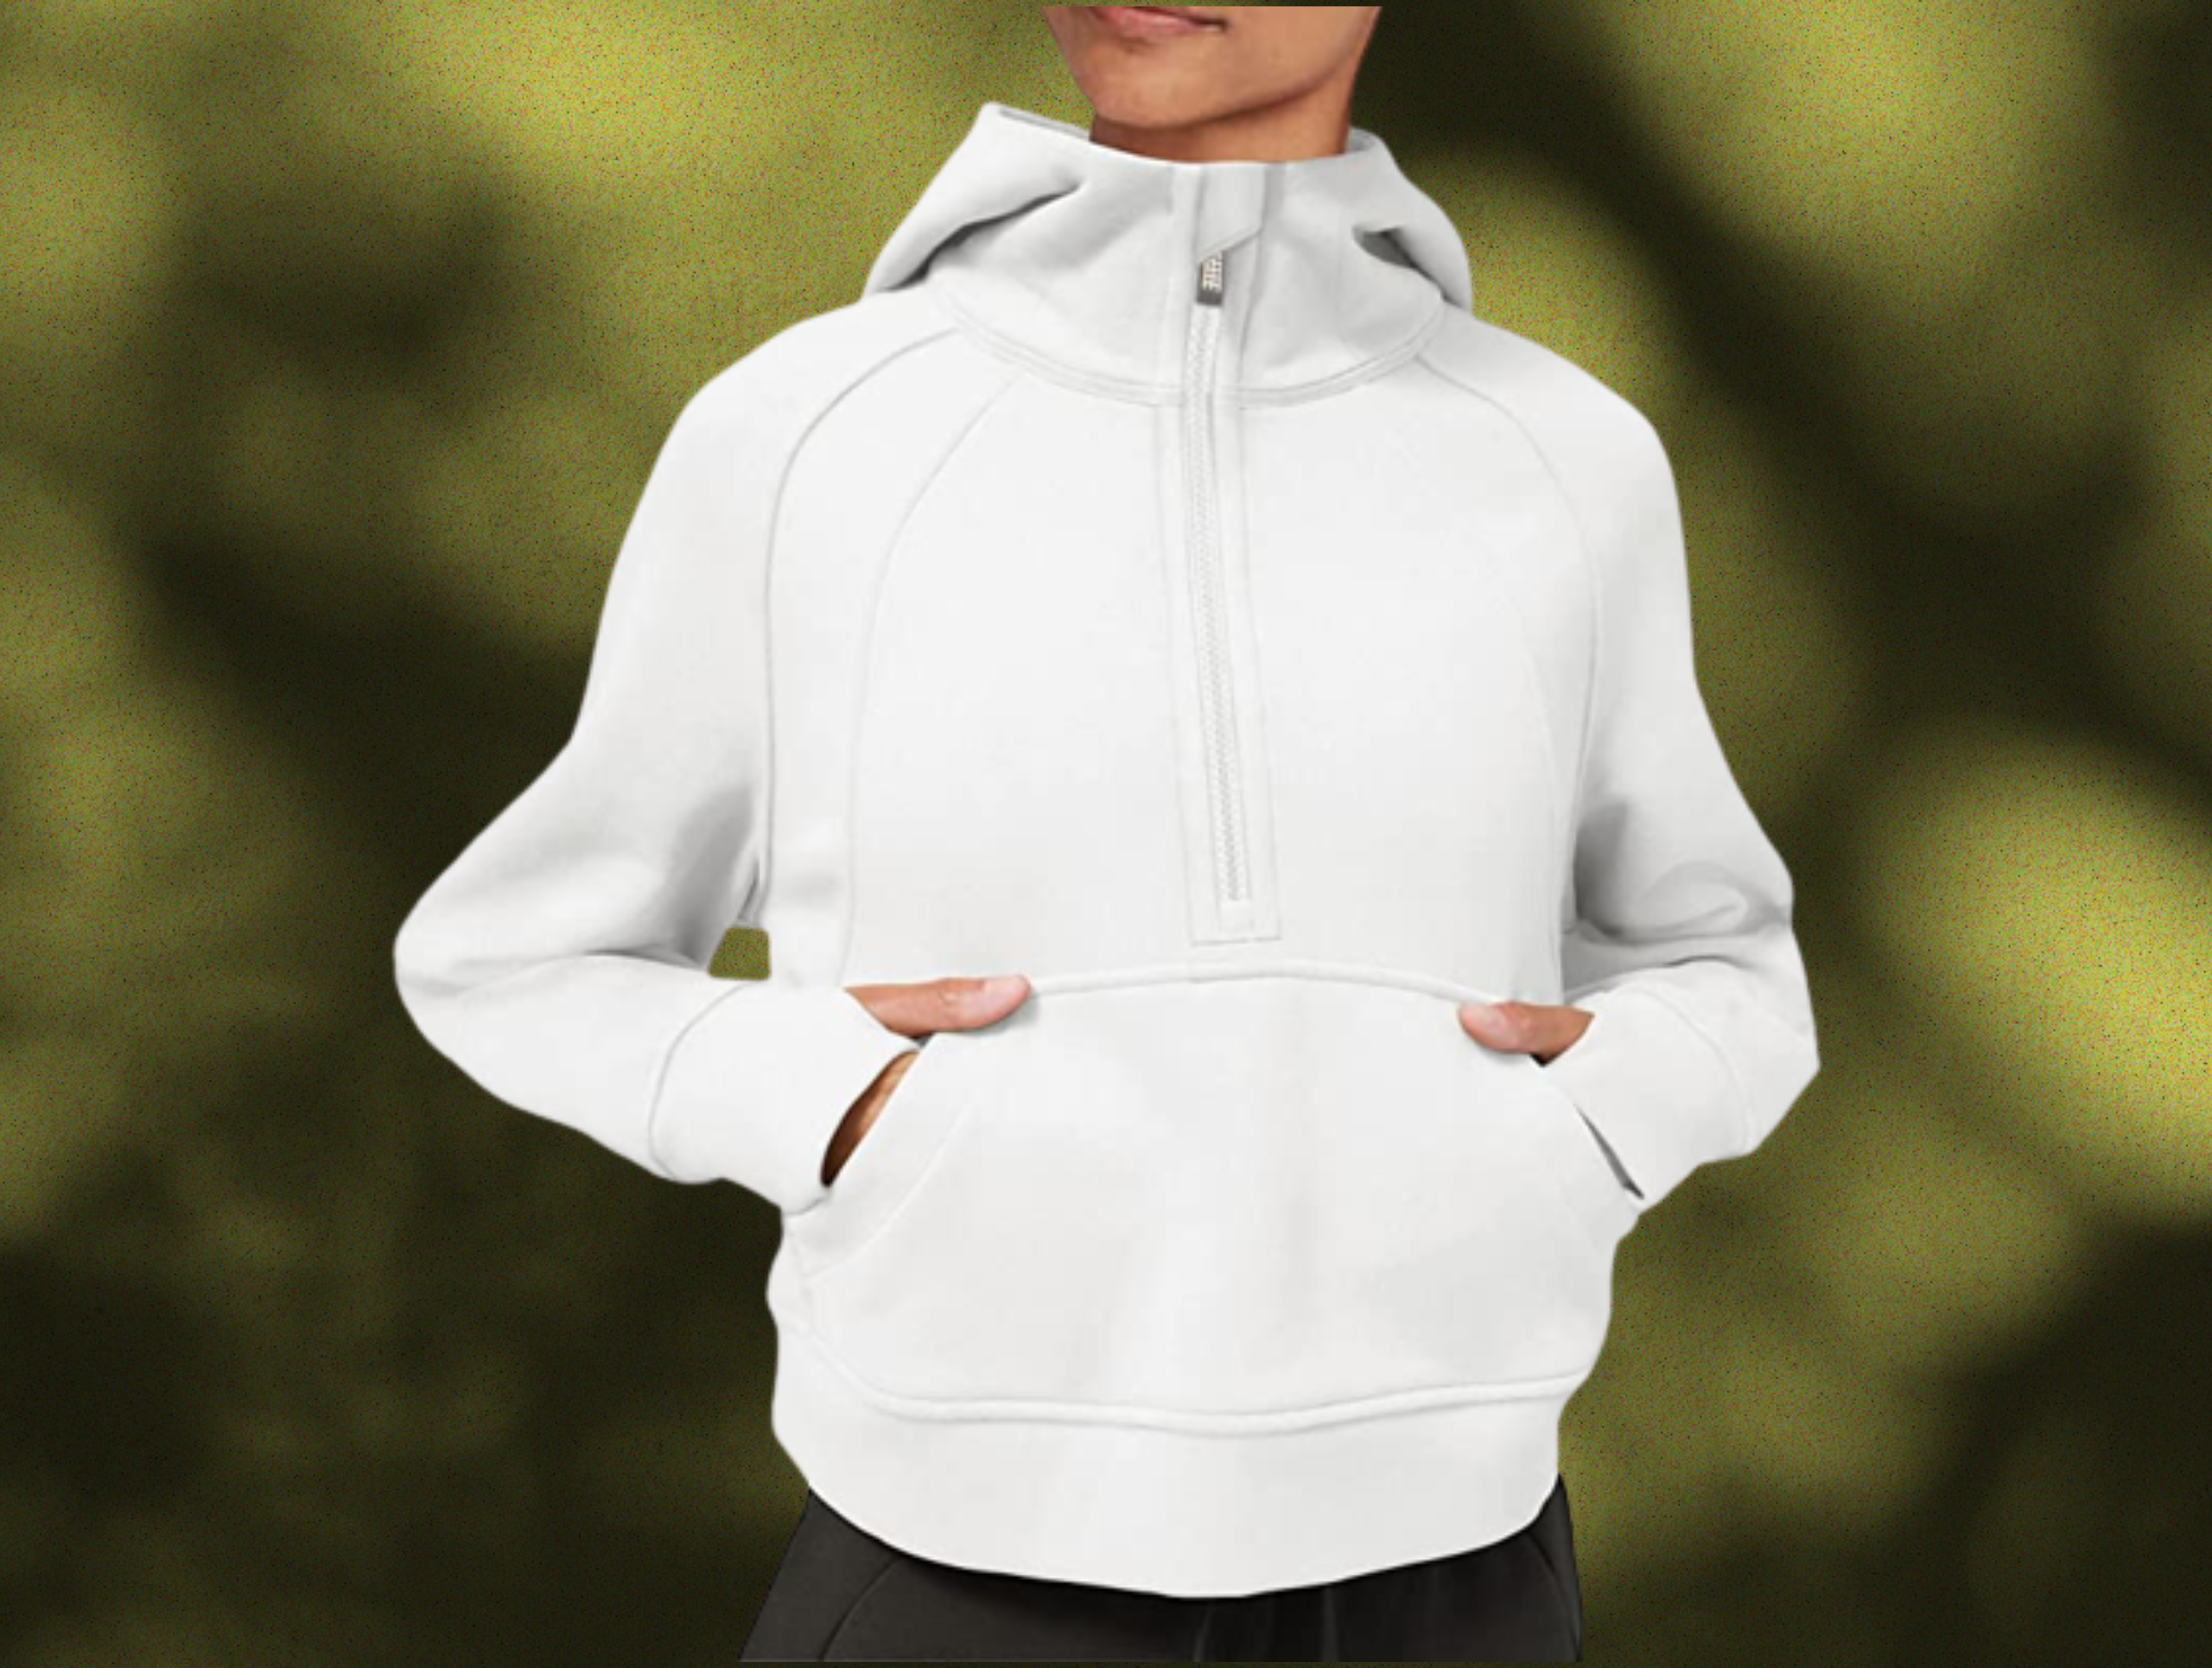 the perfect lululemon scuba hoodie dupe from ! i would